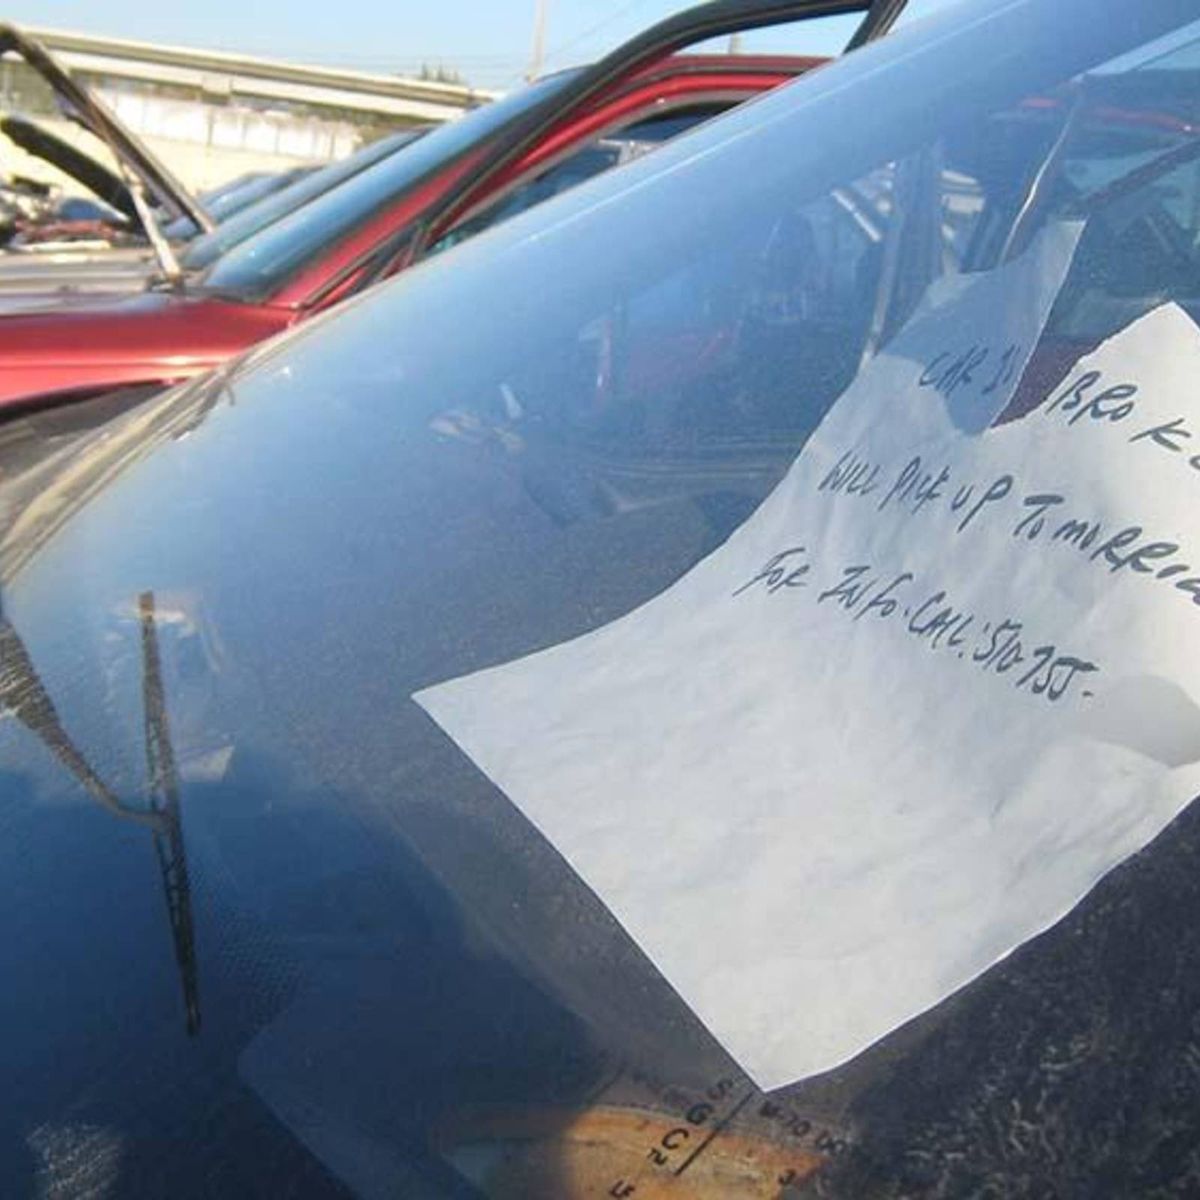 Will a note on your illegally parked car keep it from getting towed?